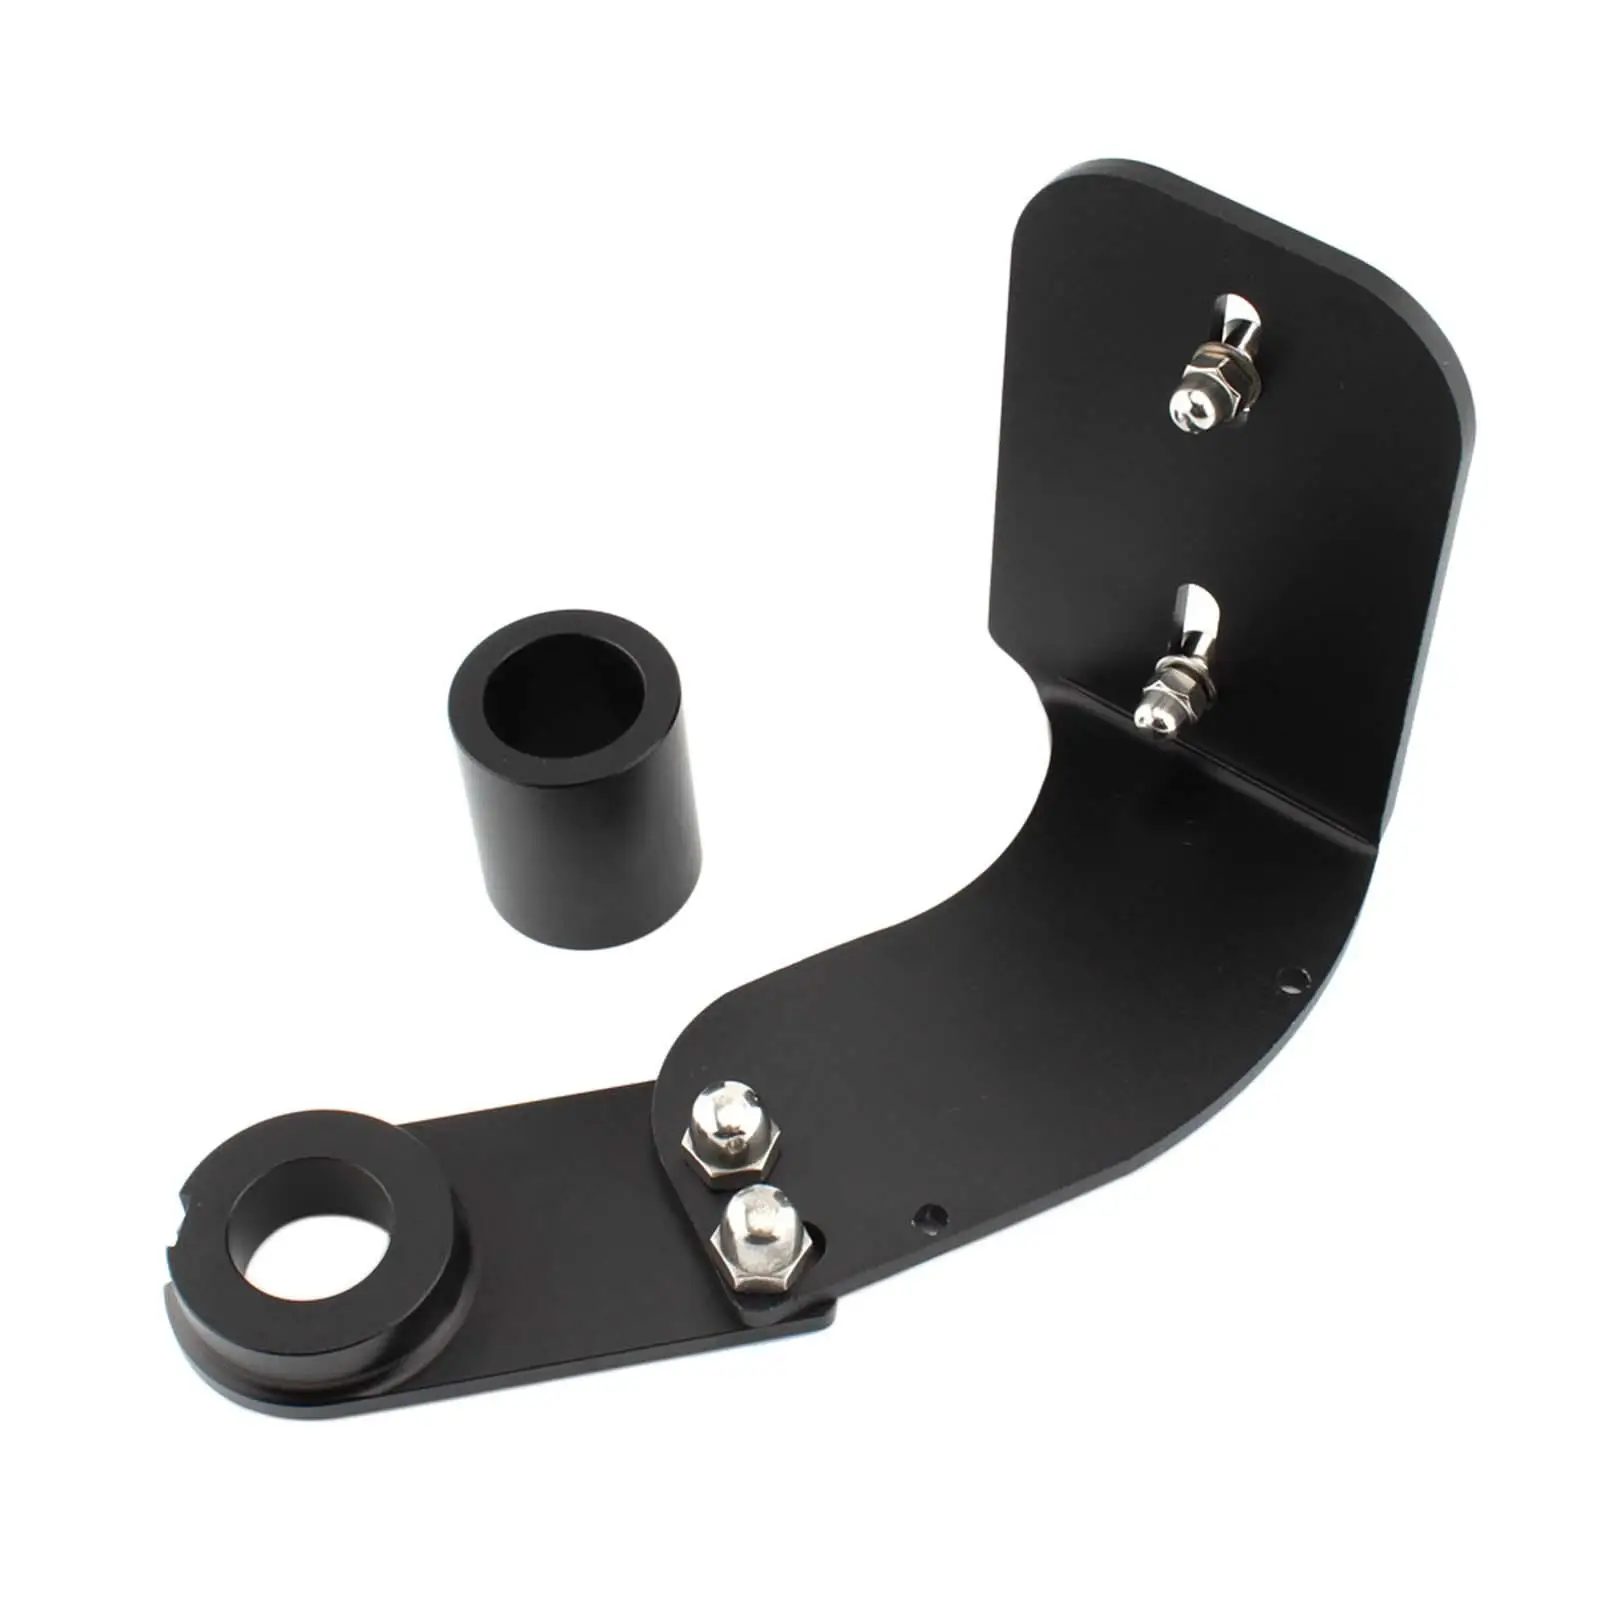 Side License Plate Bracket Holder Replaces Spare Parts for Fat Boy